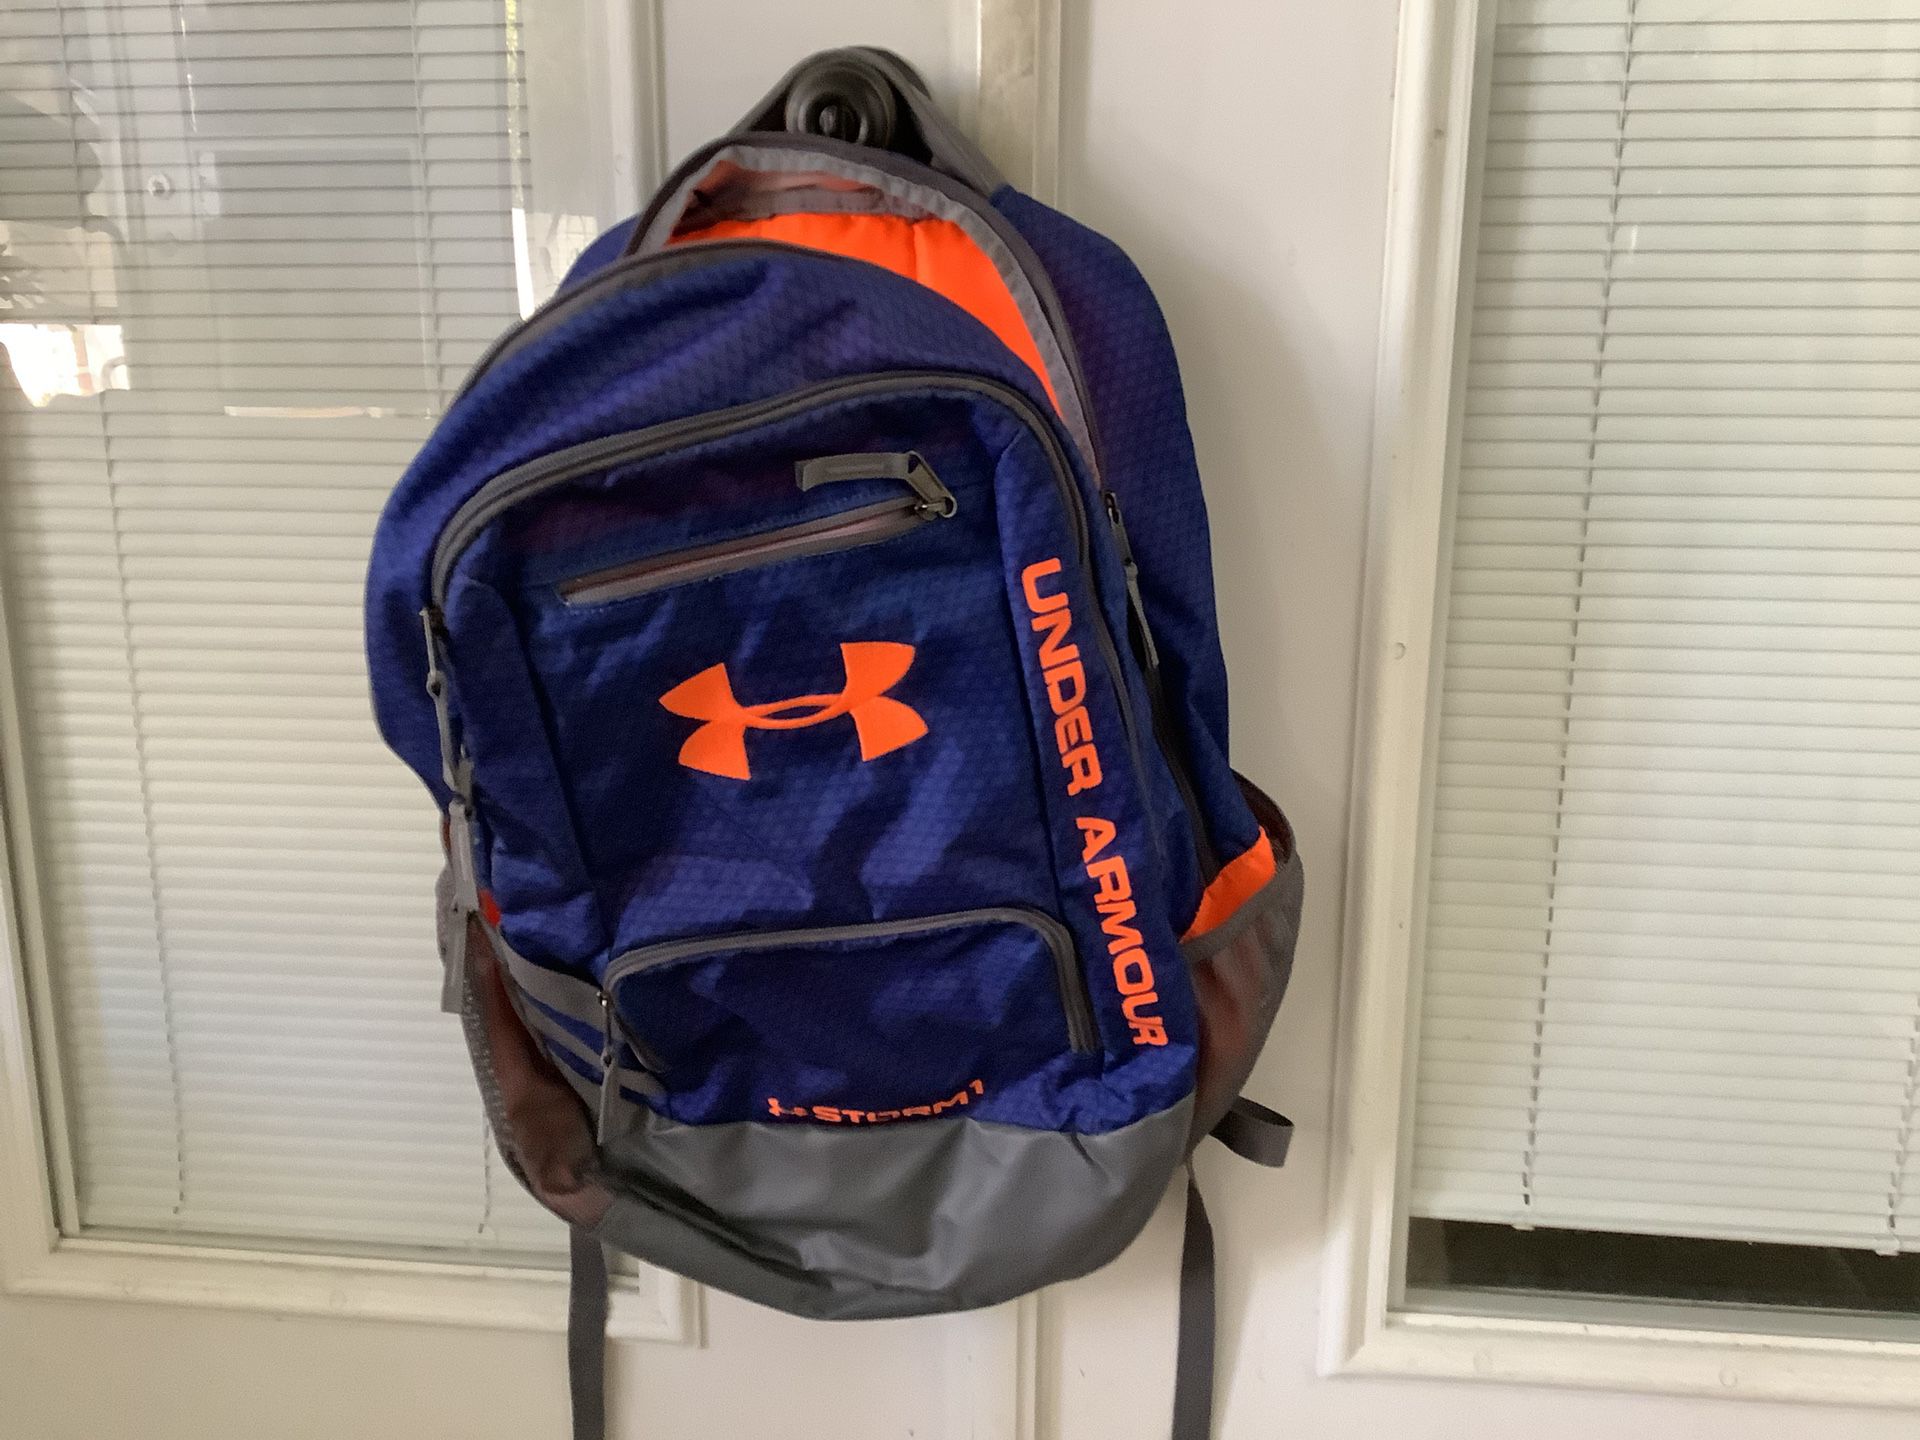 Under Armour Storm backpack blue with orange detail